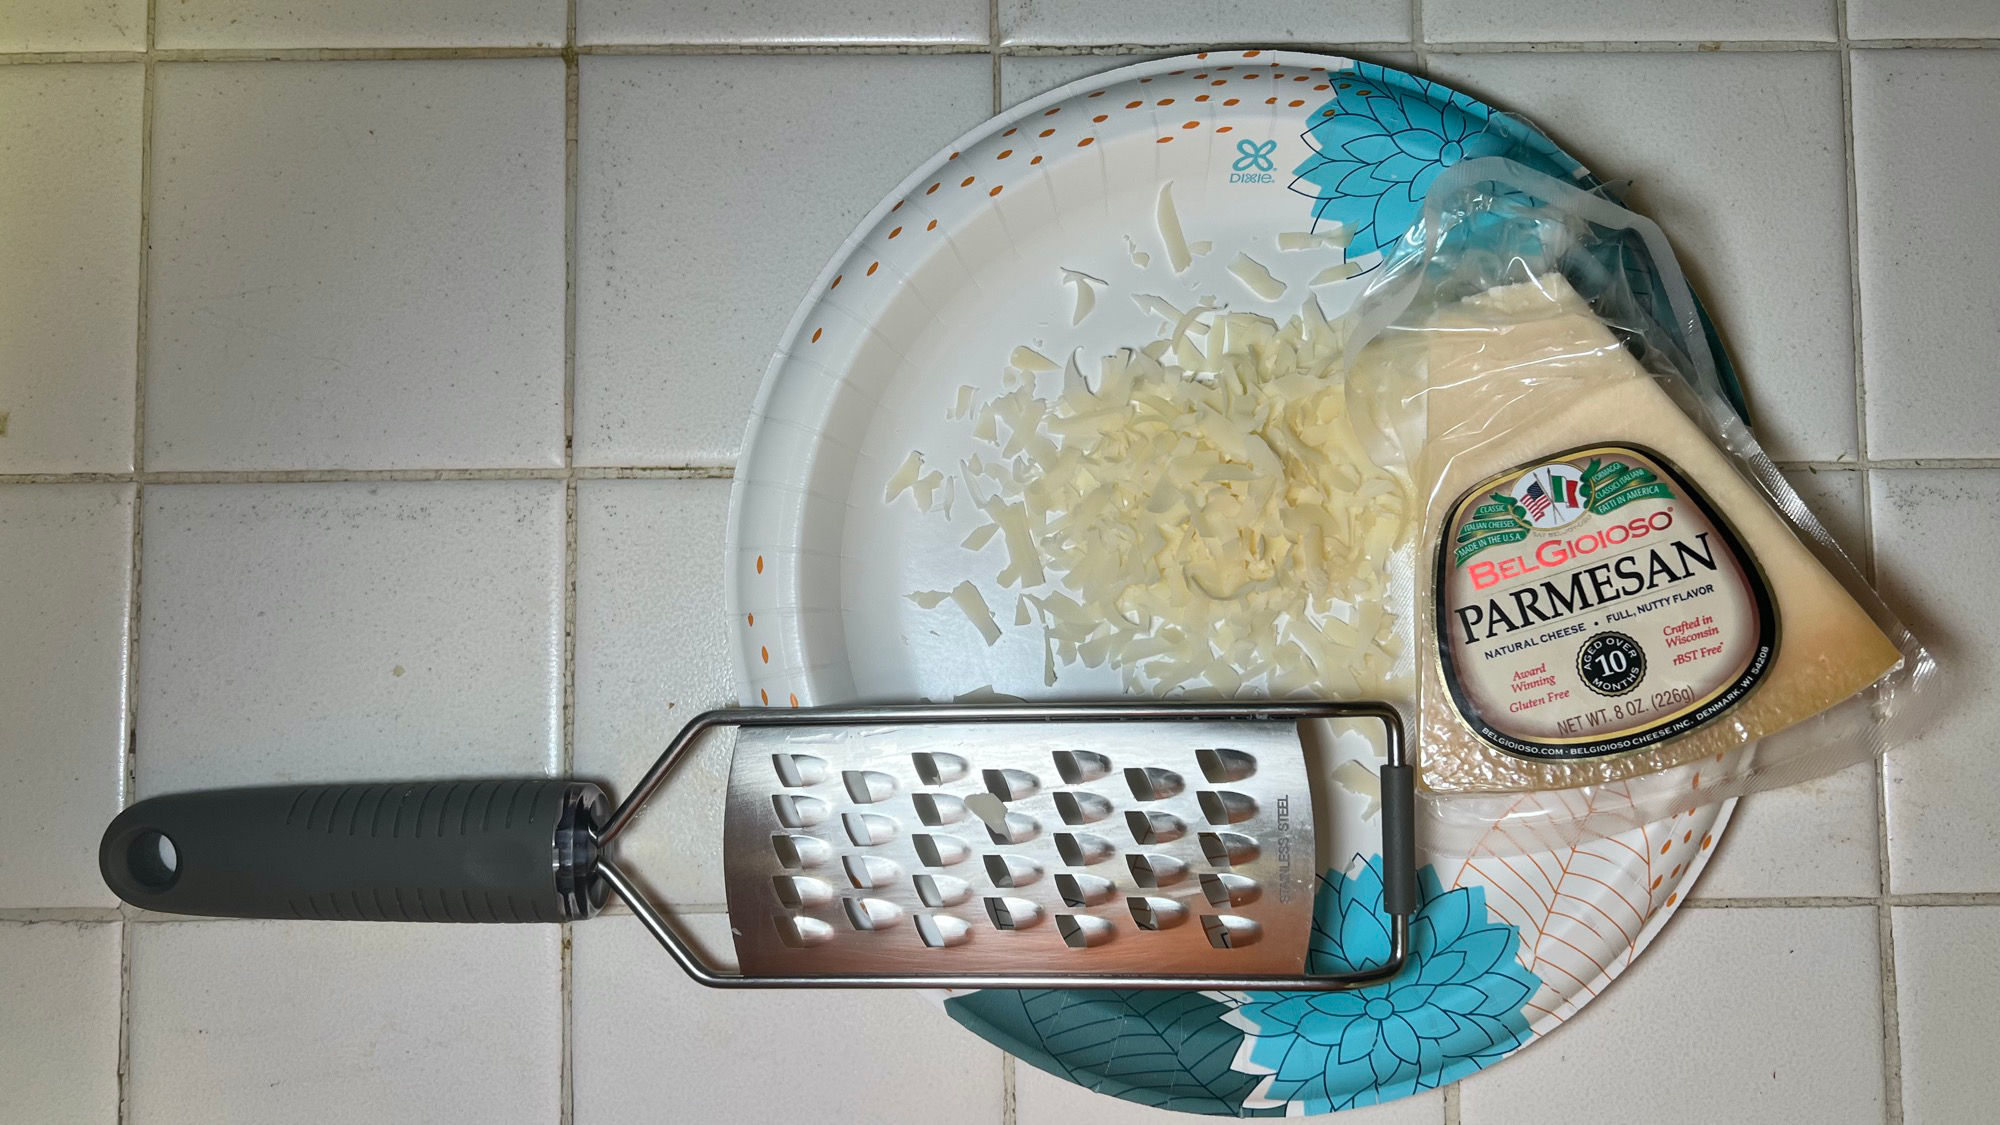 Grated Parmesan Bel Gioioso